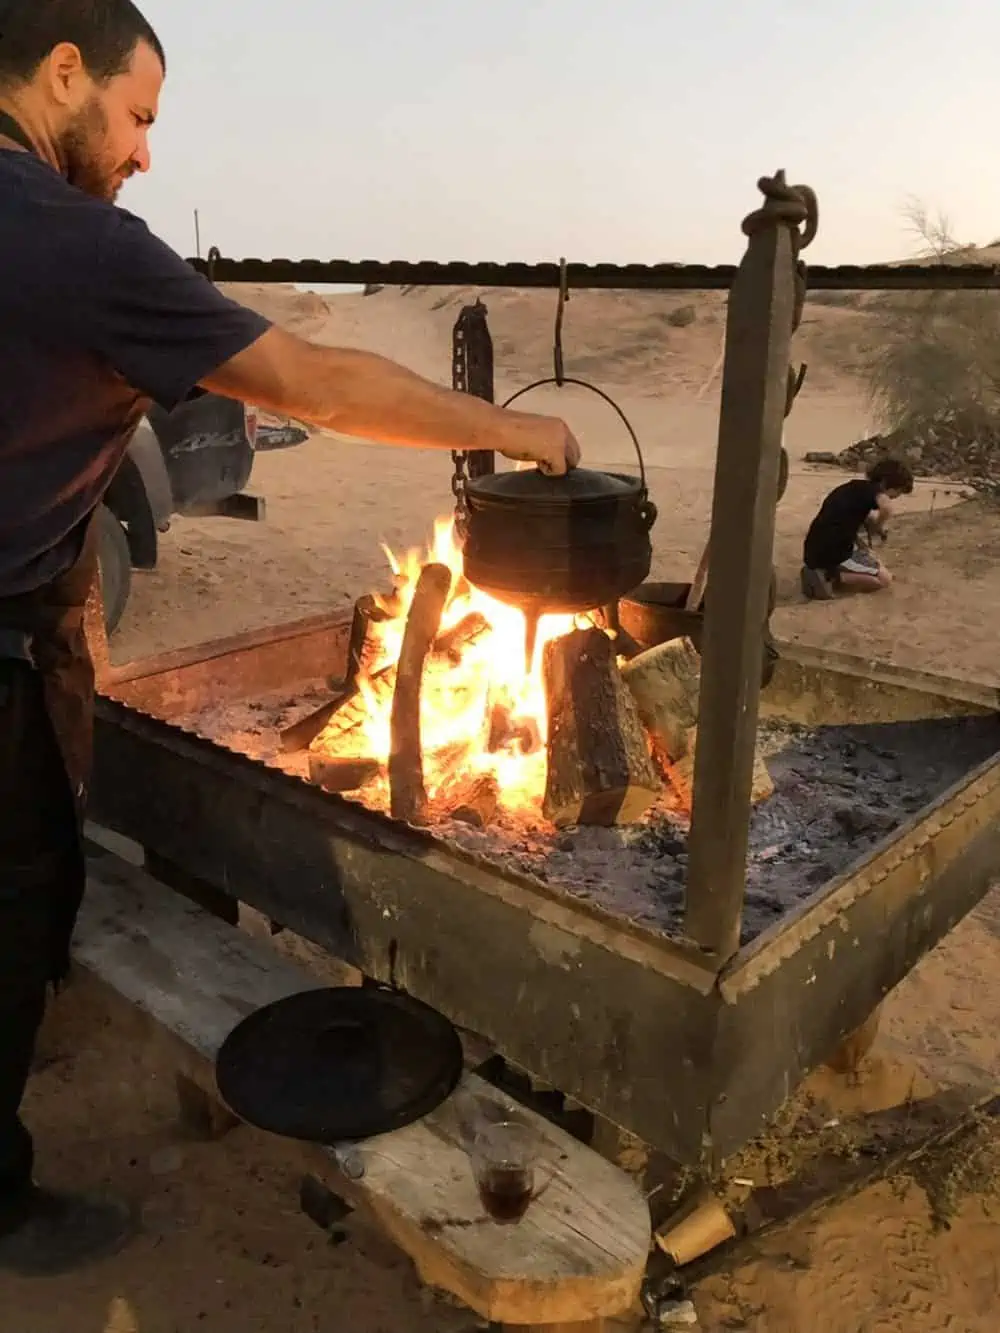 Man cooking in a Poyke pots at Desert Adventure.